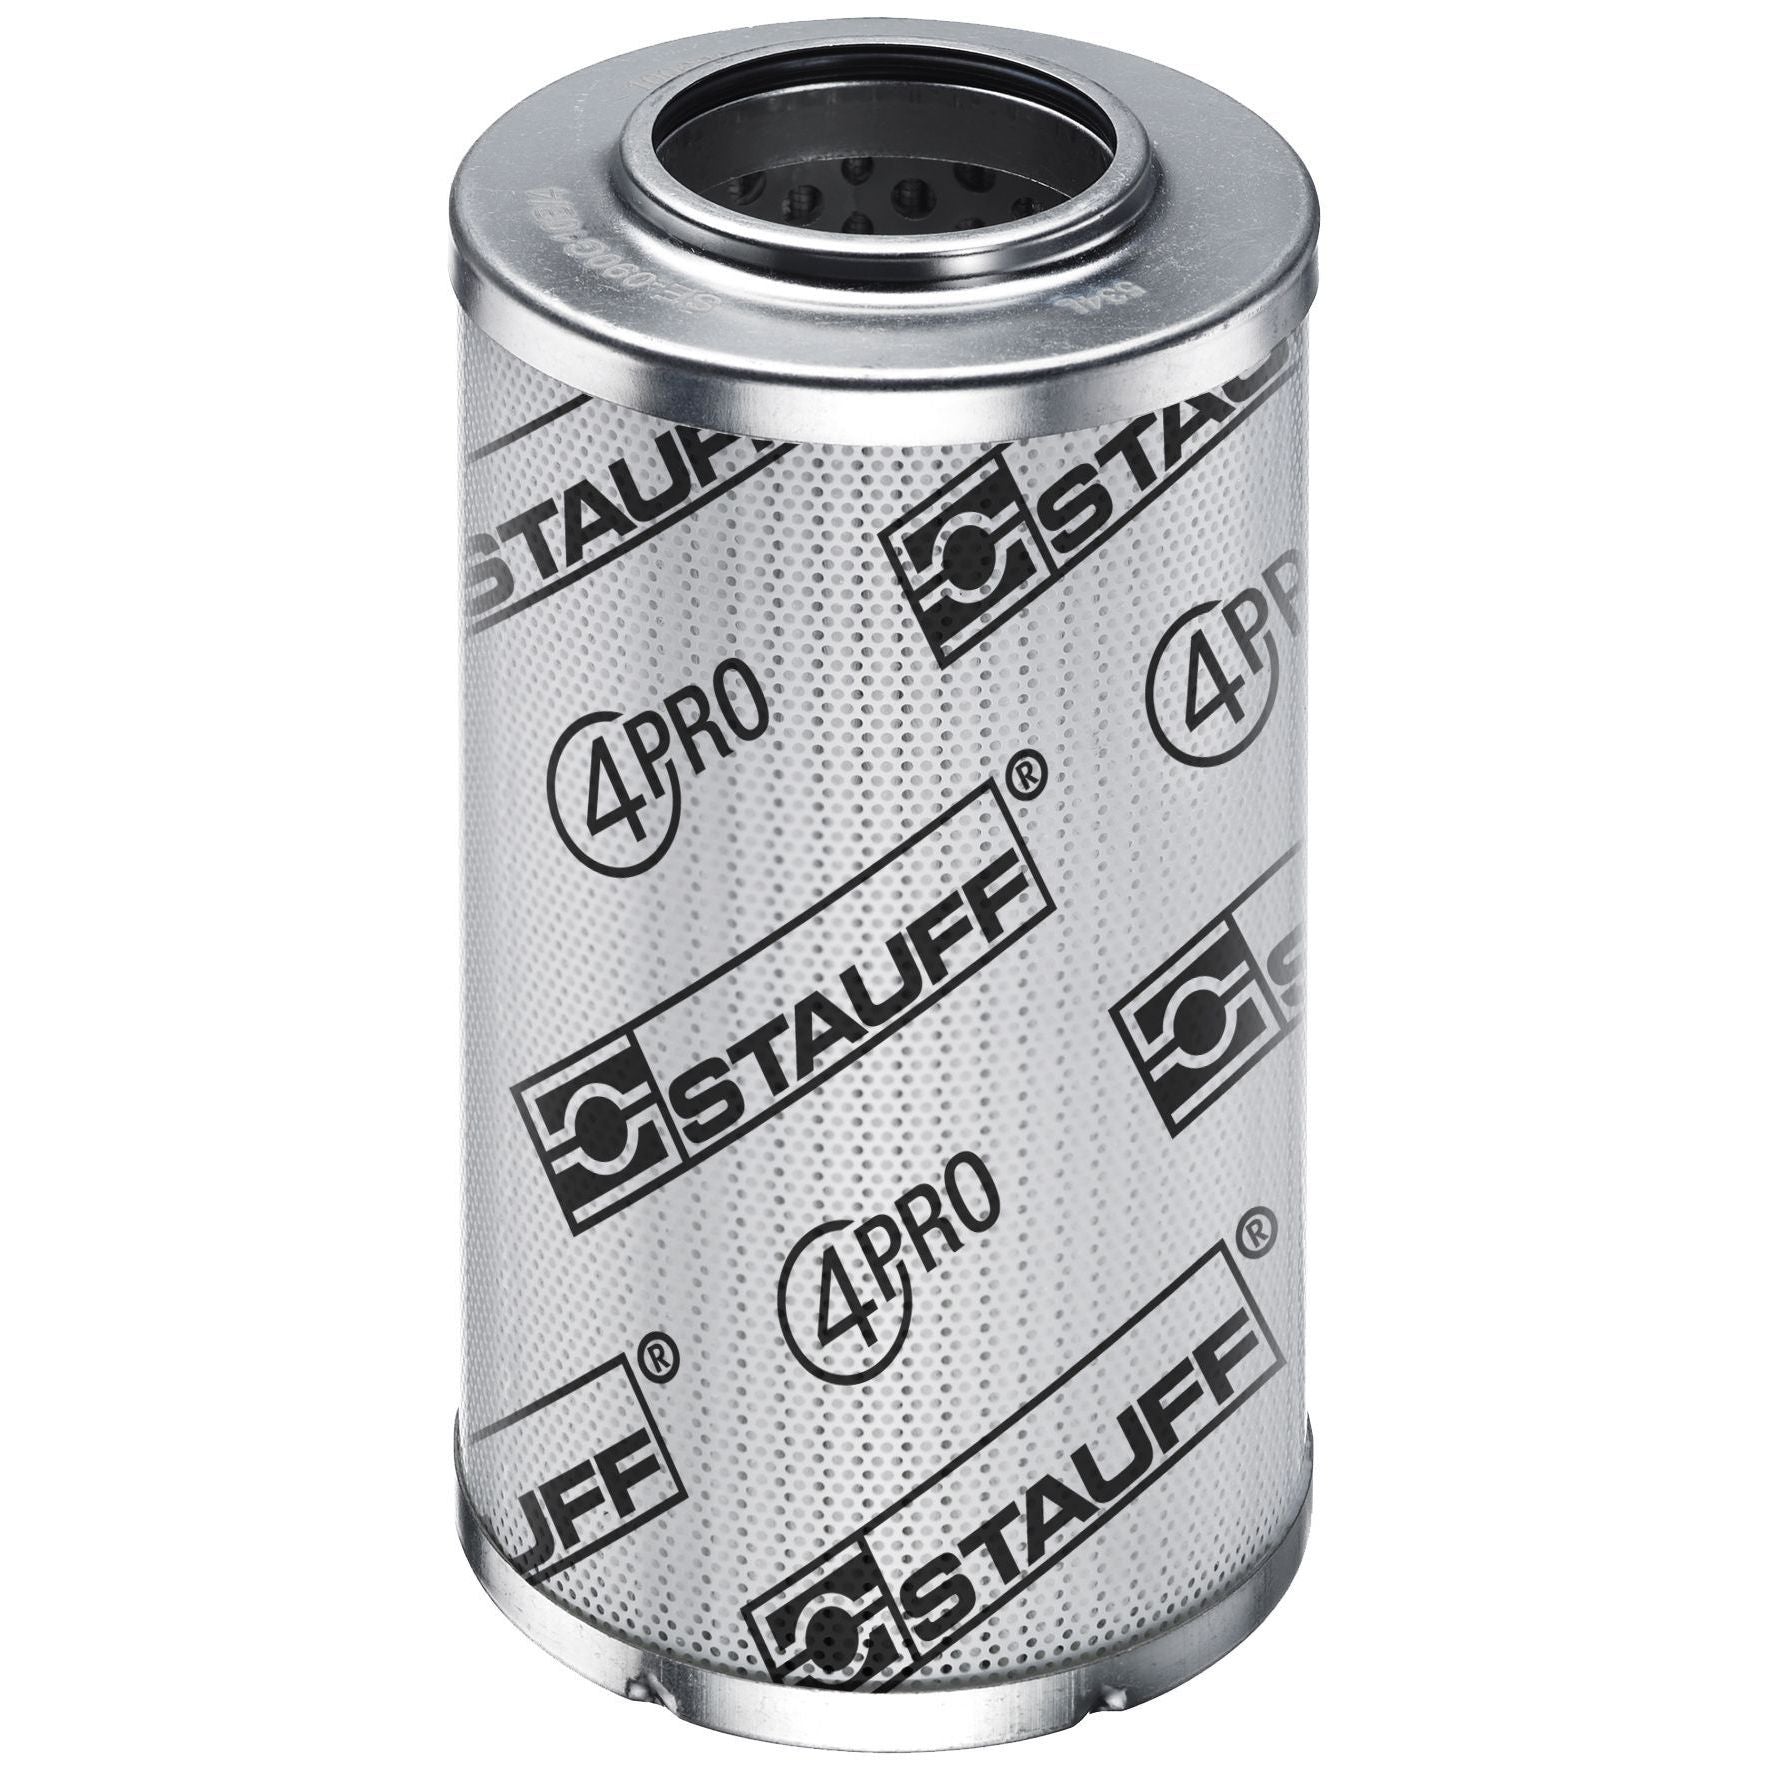 SE-045-G-05-V/4 : Stauff SF-045 Series Filter Element, 5 Micron, Synthetic, 363psi Collapse Differential, Viton Seals